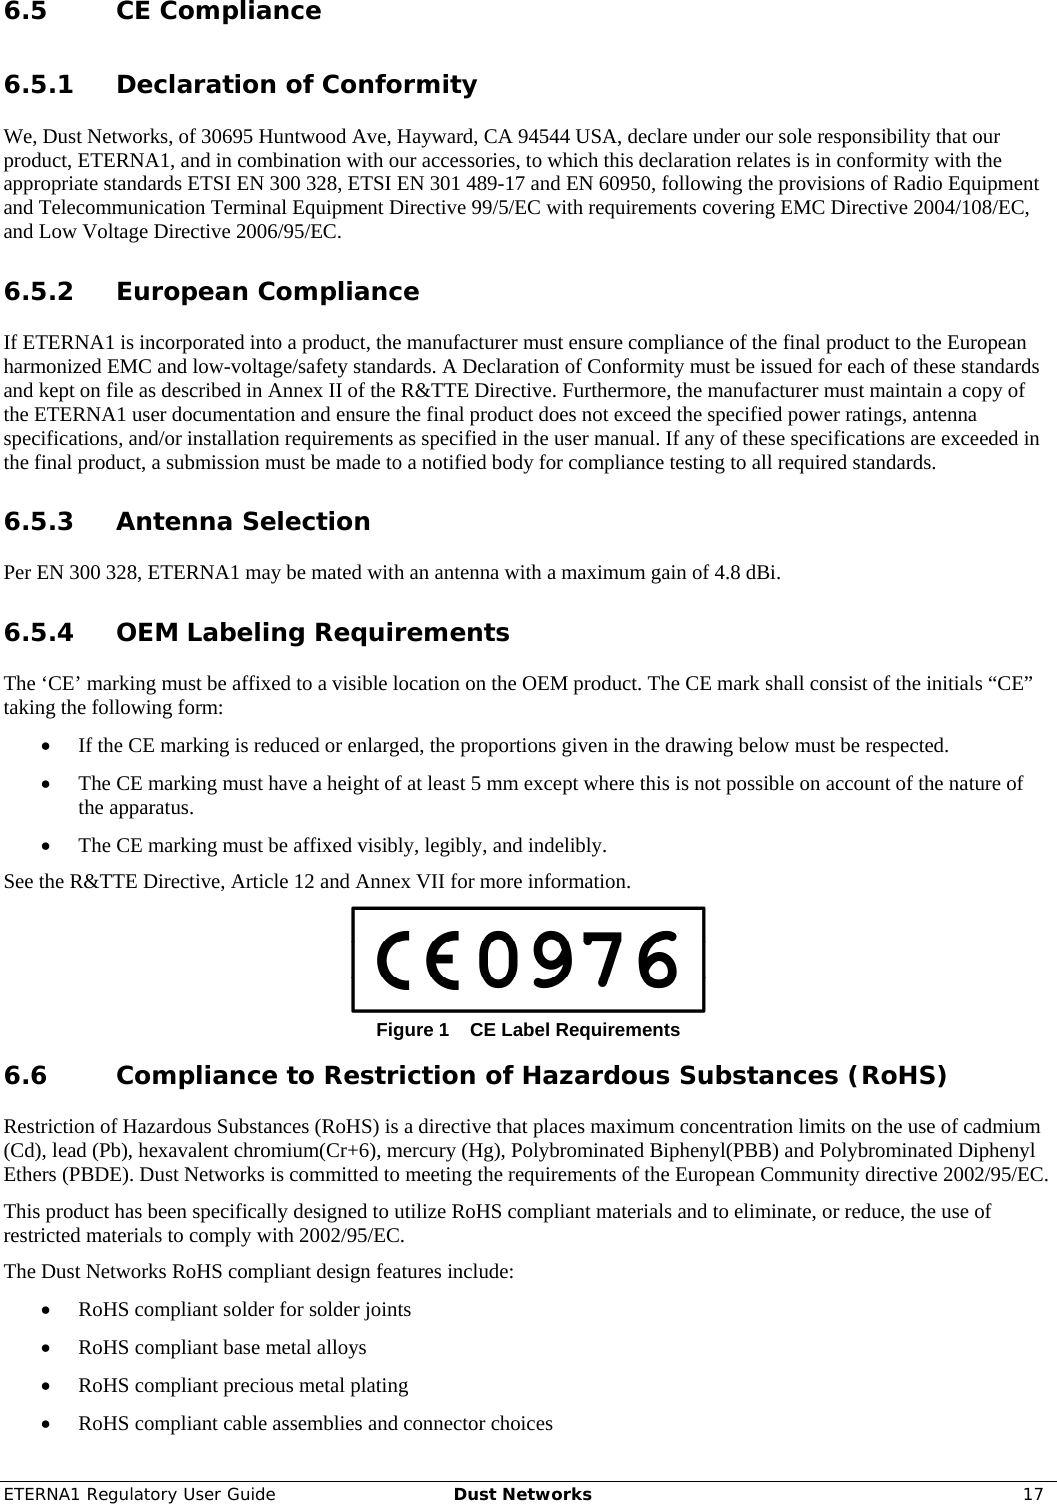 ETERNA1 Regulatory User Guide  Dust Networks  17  6.5 CE Compliance 6.5.1 Declaration of Conformity We, Dust Networks, of 30695 Huntwood Ave, Hayward, CA 94544 USA, declare under our sole responsibility that our product, ETERNA1, and in combination with our accessories, to which this declaration relates is in conformity with the appropriate standards ETSI EN 300 328, ETSI EN 301 489-17 and EN 60950, following the provisions of Radio Equipment and Telecommunication Terminal Equipment Directive 99/5/EC with requirements covering EMC Directive 2004/108/EC, and Low Voltage Directive 2006/95/EC. 6.5.2 European Compliance If ETERNA1 is incorporated into a product, the manufacturer must ensure compliance of the final product to the European harmonized EMC and low-voltage/safety standards. A Declaration of Conformity must be issued for each of these standards and kept on file as described in Annex II of the R&amp;TTE Directive. Furthermore, the manufacturer must maintain a copy of the ETERNA1 user documentation and ensure the final product does not exceed the specified power ratings, antenna specifications, and/or installation requirements as specified in the user manual. If any of these specifications are exceeded in the final product, a submission must be made to a notified body for compliance testing to all required standards. 6.5.3 Antenna Selection Per EN 300 328, ETERNA1 may be mated with an antenna with a maximum gain of 4.8 dBi. 6.5.4 OEM Labeling Requirements The ‘CE’ marking must be affixed to a visible location on the OEM product. The CE mark shall consist of the initials “CE” taking the following form: • If the CE marking is reduced or enlarged, the proportions given in the drawing below must be respected. • The CE marking must have a height of at least 5 mm except where this is not possible on account of the nature of the apparatus. • The CE marking must be affixed visibly, legibly, and indelibly. See the R&amp;TTE Directive, Article 12 and Annex VII for more information.  Figure 1  CE Label Requirements 6.6 Compliance to Restriction of Hazardous Substances (RoHS) Restriction of Hazardous Substances (RoHS) is a directive that places maximum concentration limits on the use of cadmium (Cd), lead (Pb), hexavalent chromium(Cr+6), mercury (Hg), Polybrominated Biphenyl(PBB) and Polybrominated Diphenyl Ethers (PBDE). Dust Networks is committed to meeting the requirements of the European Community directive 2002/95/EC.  This product has been specifically designed to utilize RoHS compliant materials and to eliminate, or reduce, the use of restricted materials to comply with 2002/95/EC. The Dust Networks RoHS compliant design features include: • RoHS compliant solder for solder joints  • RoHS compliant base metal alloys  • RoHS compliant precious metal plating • RoHS compliant cable assemblies and connector choices 